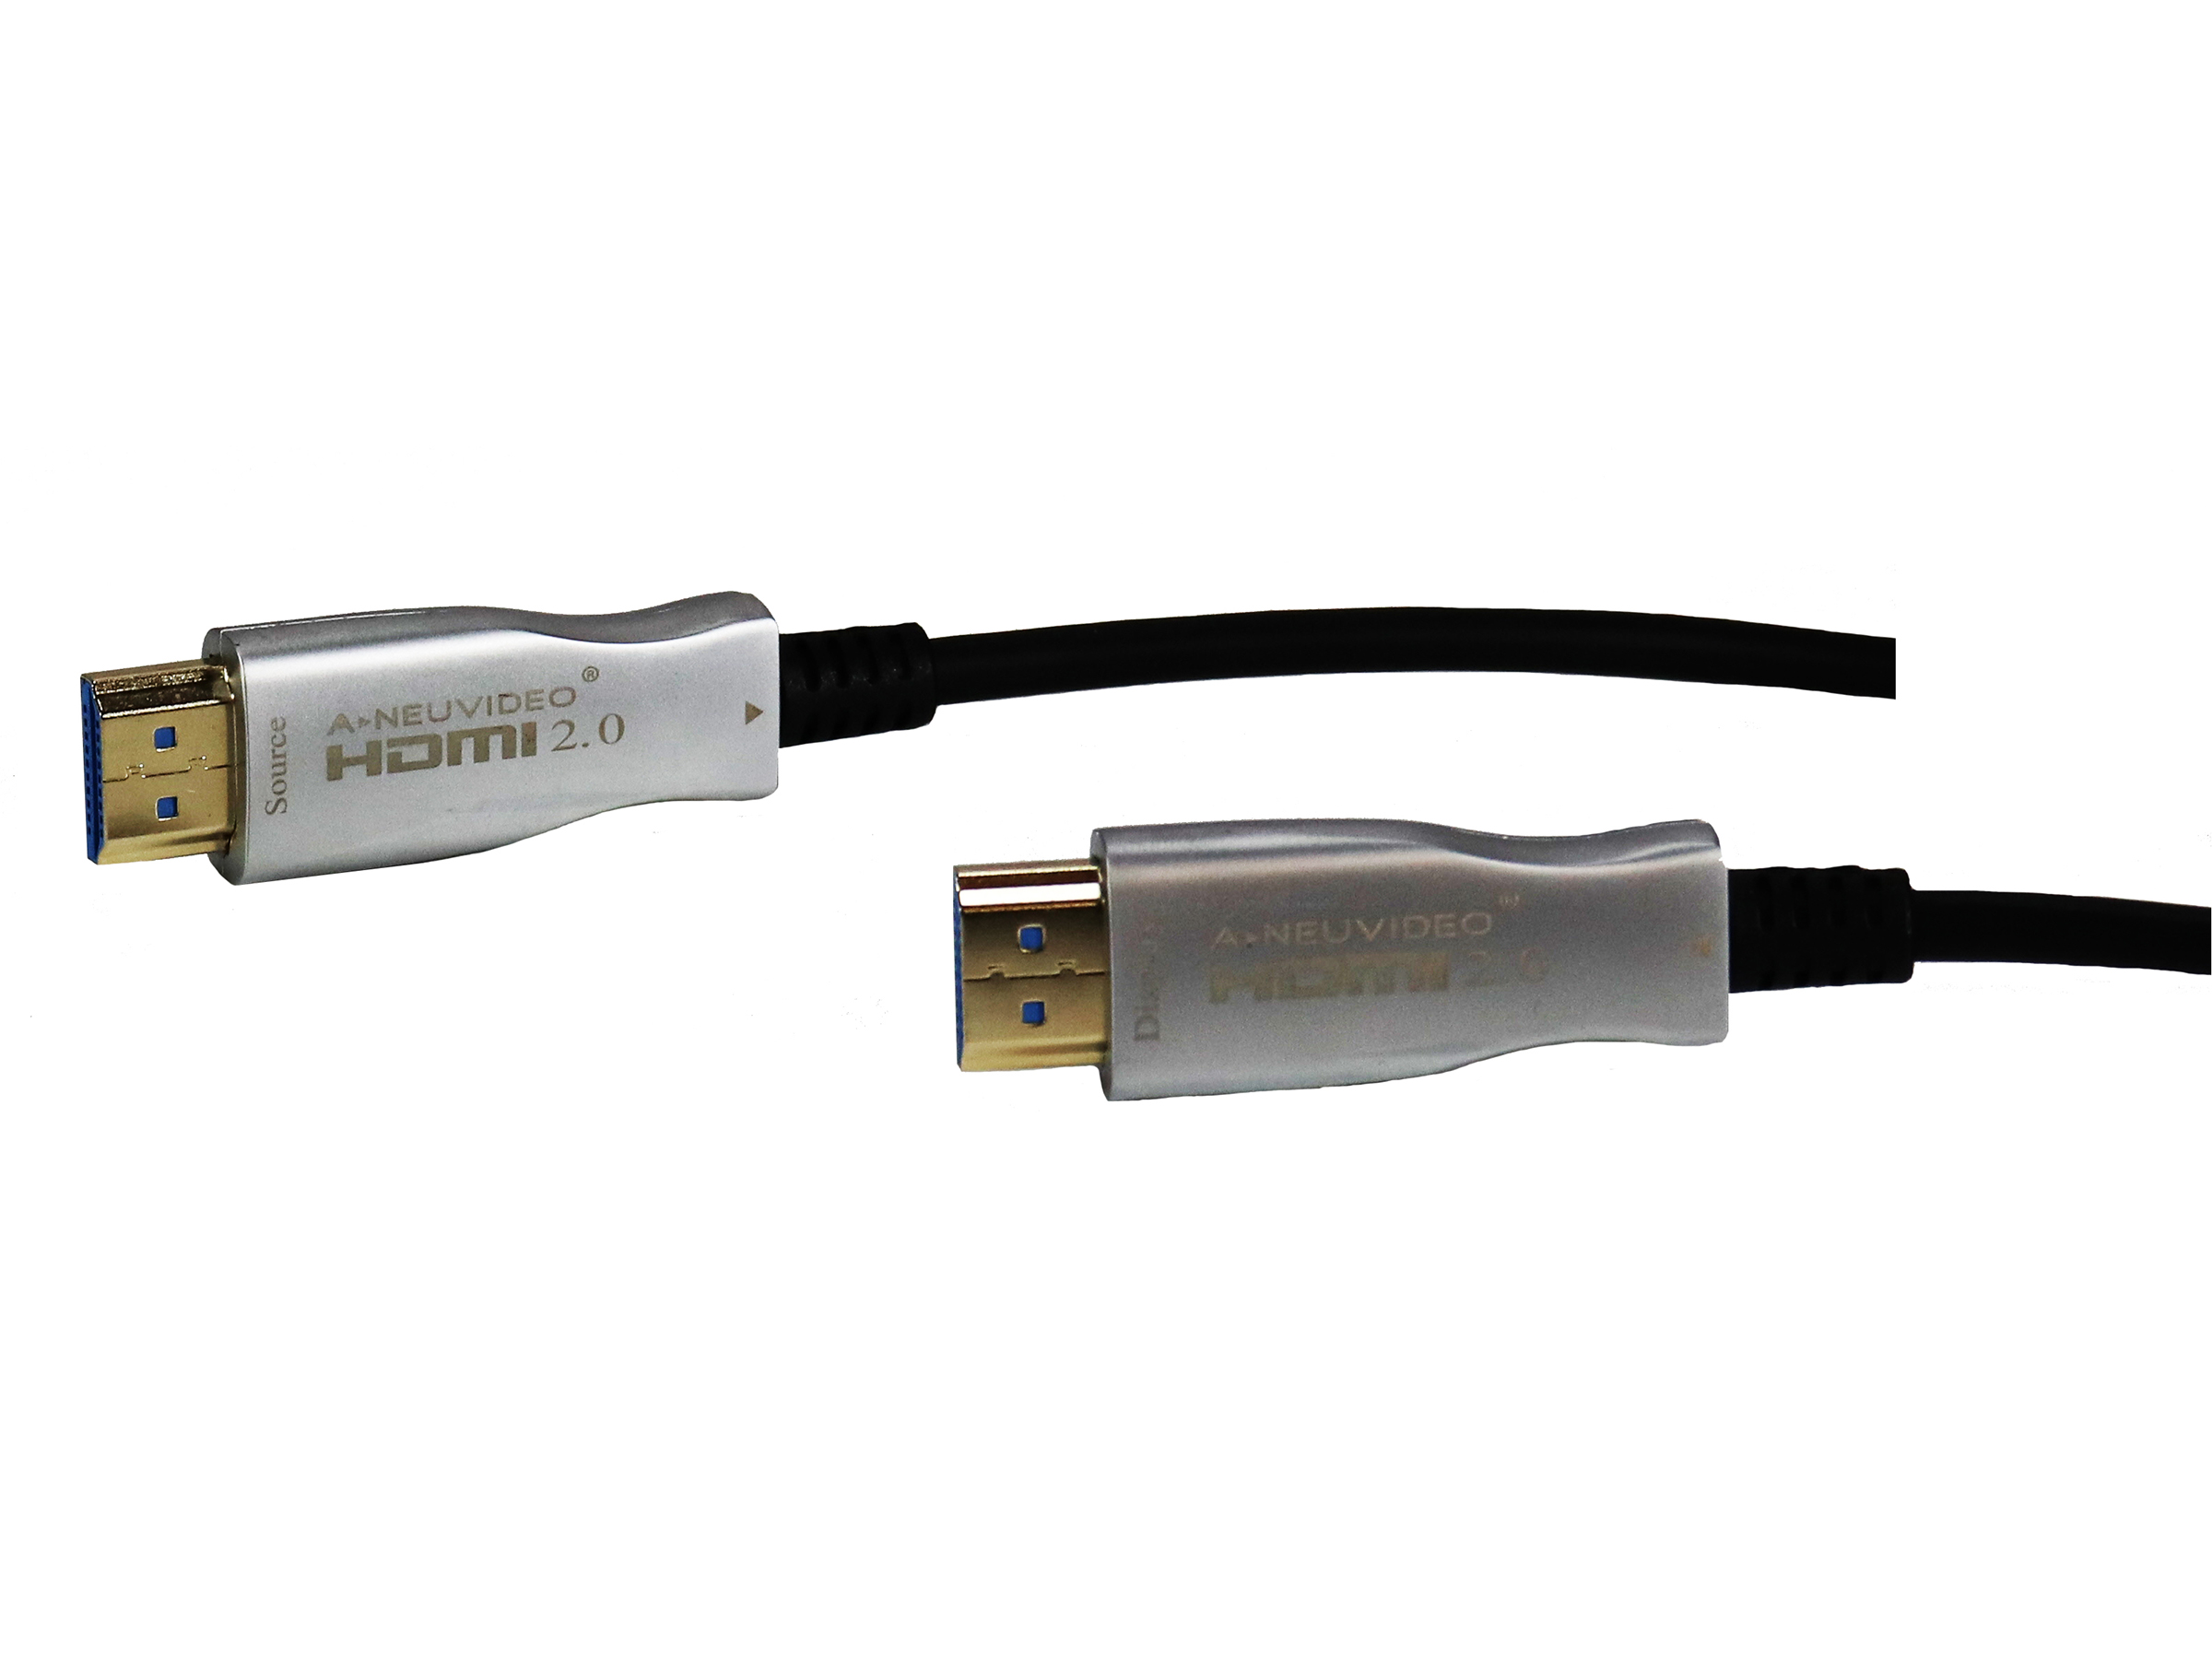 ANI-AOC-30 Fiber Optic Hdmi Active Optical Cable - 30m/98ft by A-NeuVideo